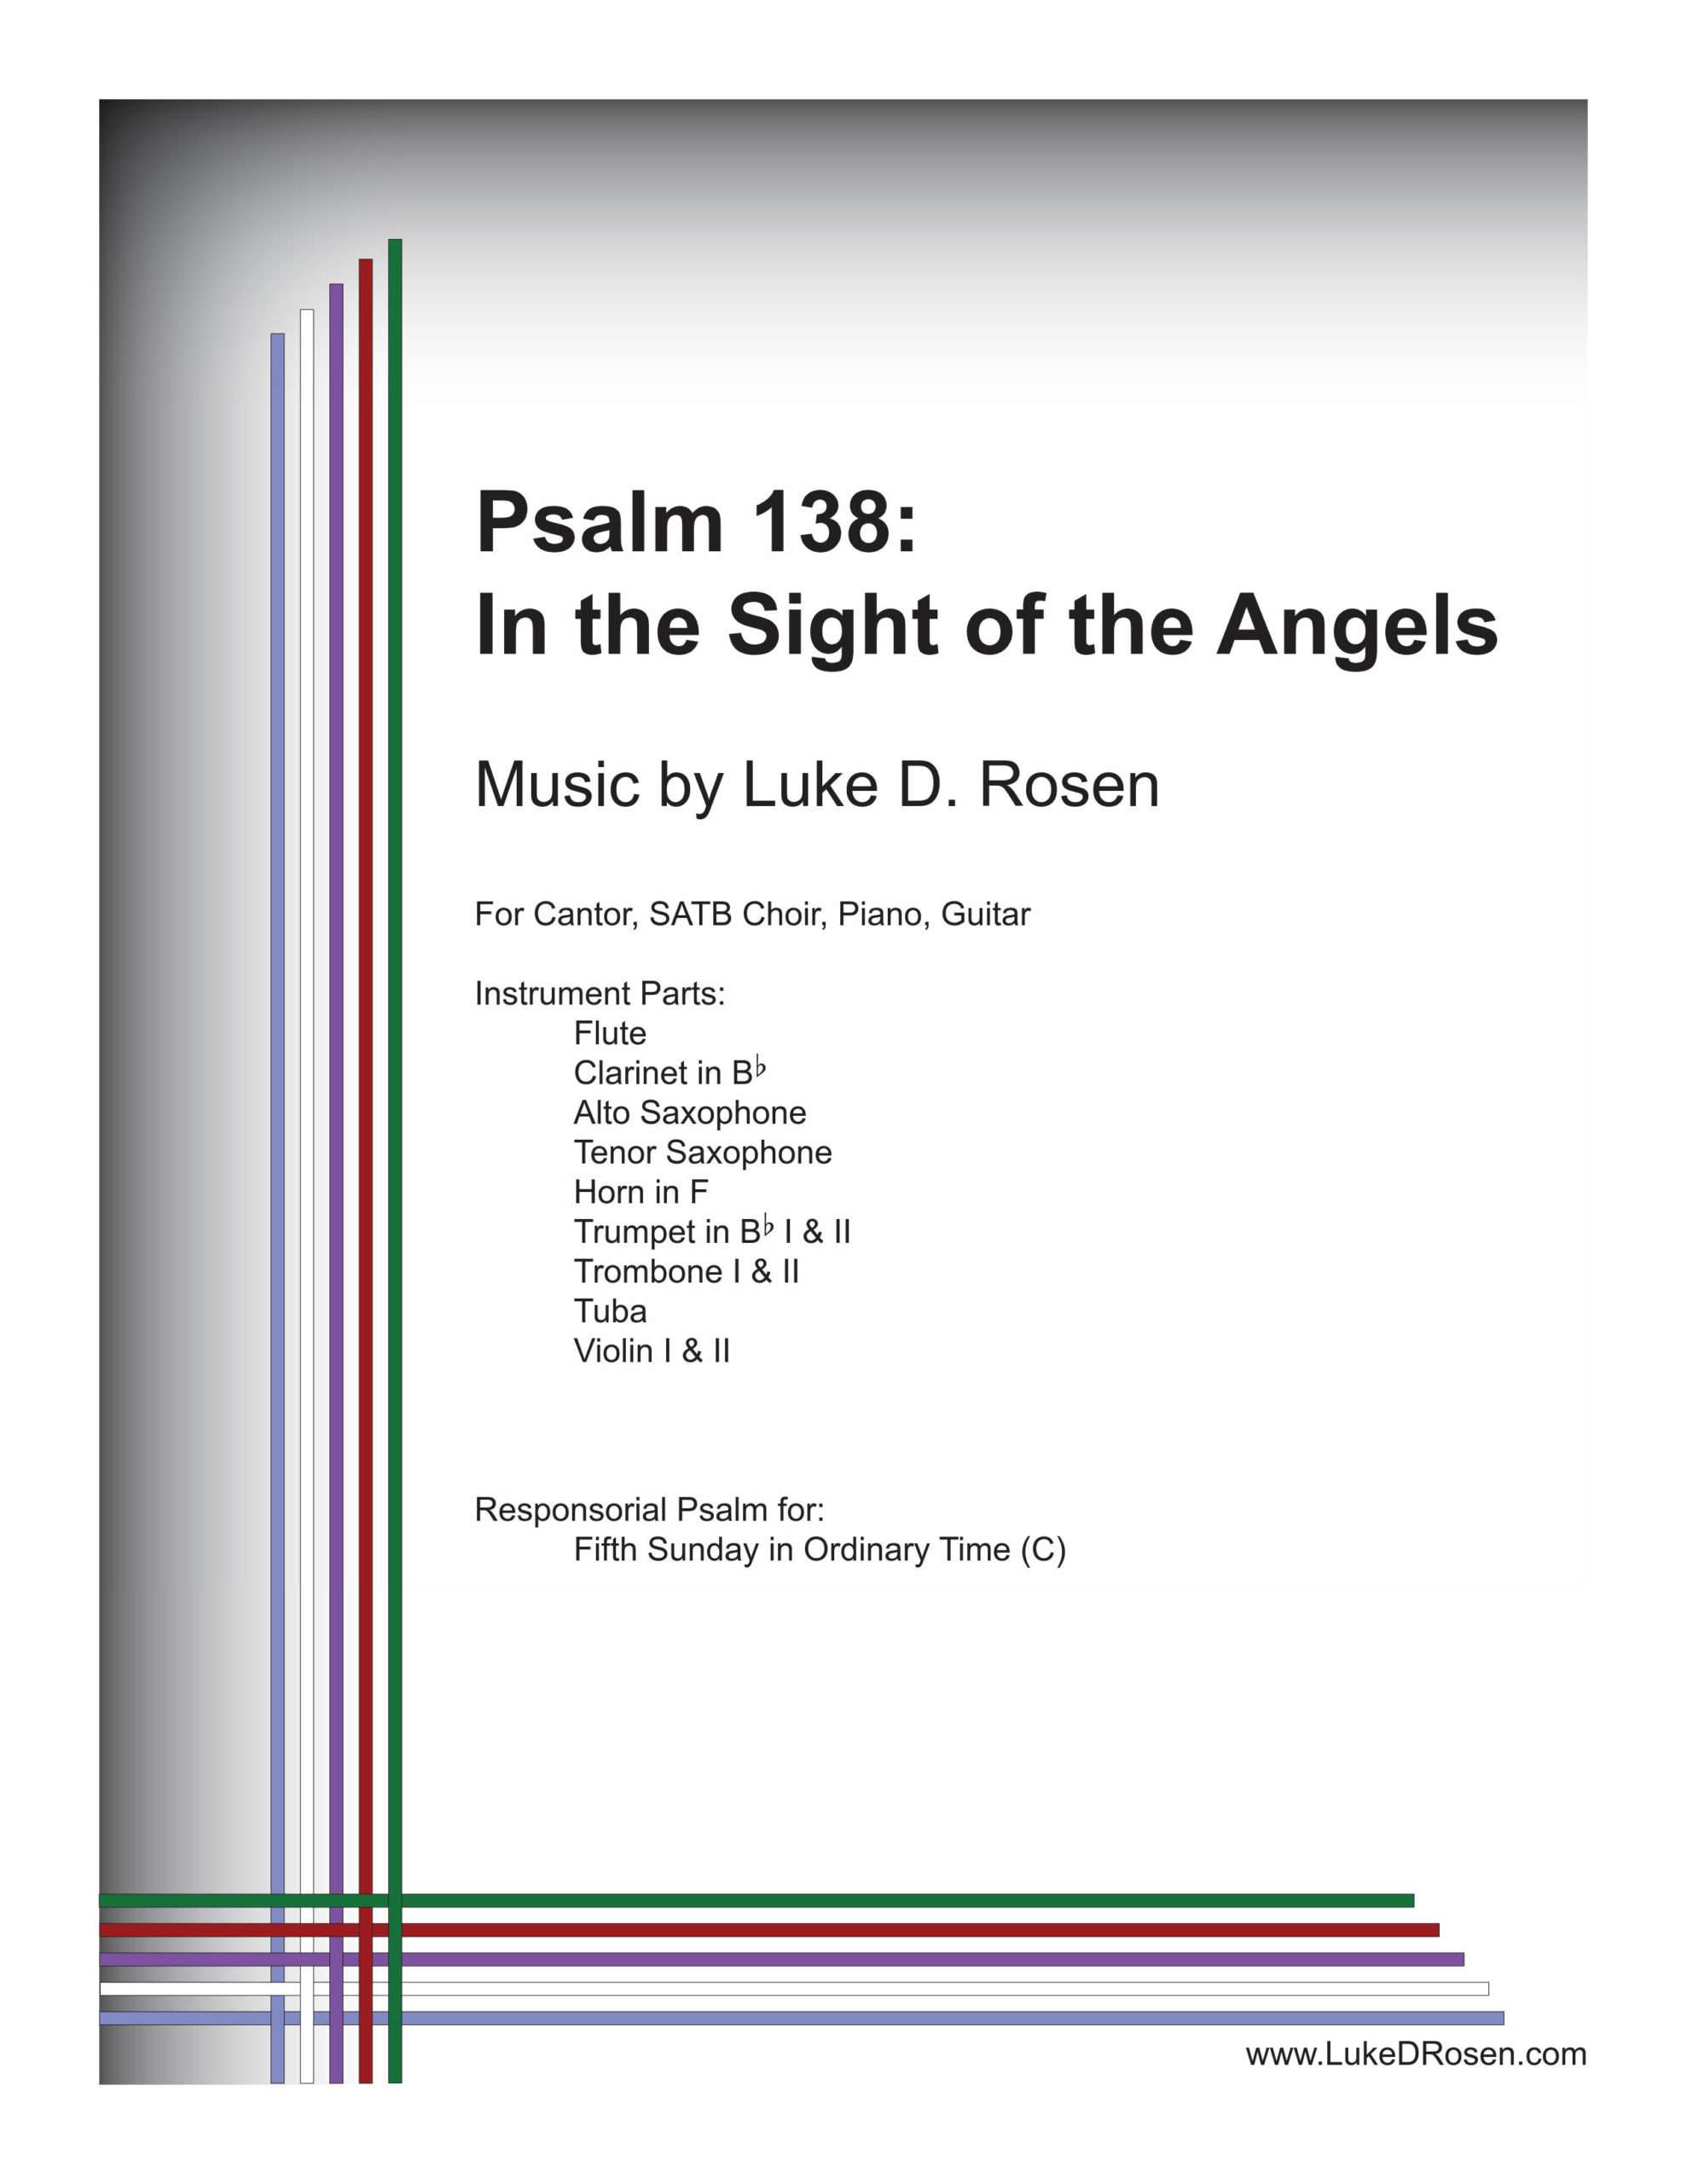 Psalm 138 – In the Sight of the Angels (Rosen)